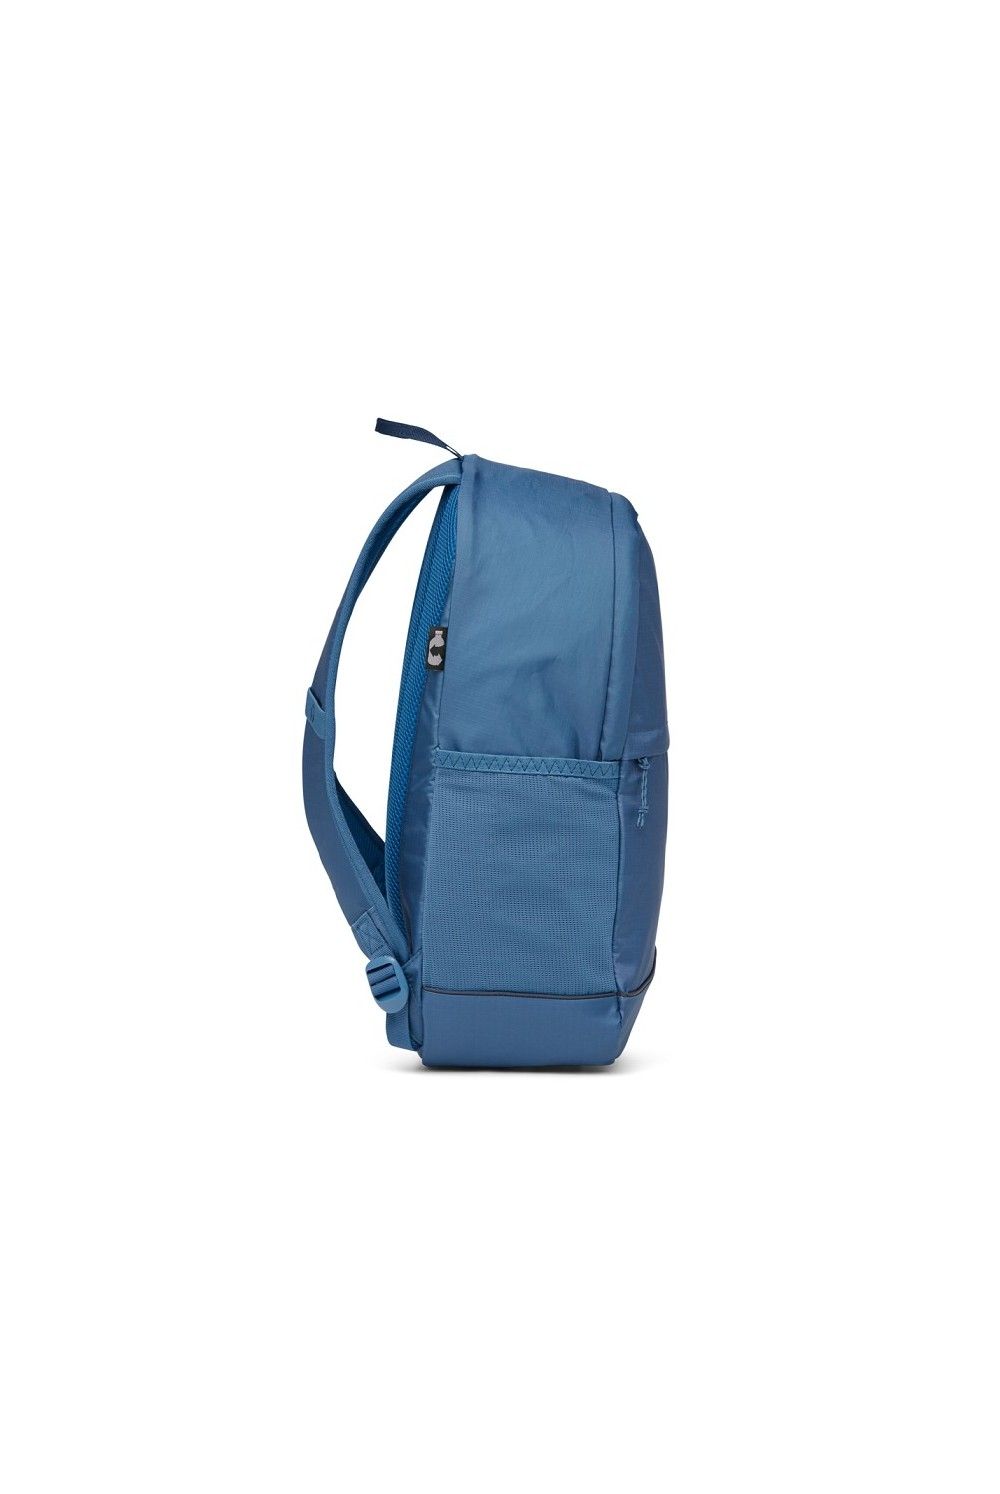 Satch Fly Rucksack Ripstop Blue